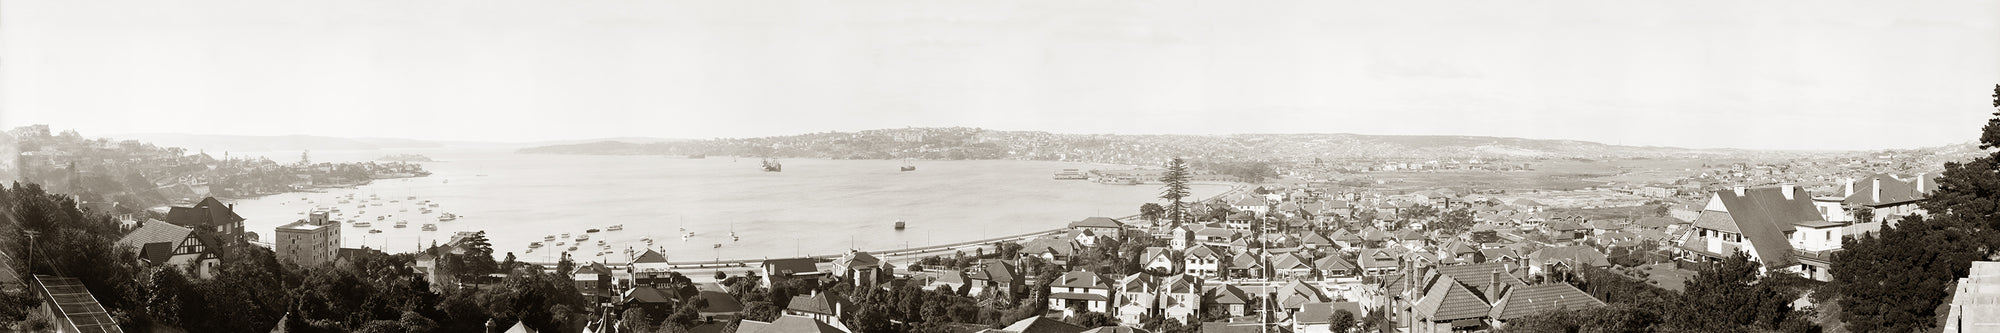 Overview, Rose Bay NSW Australia 1920s